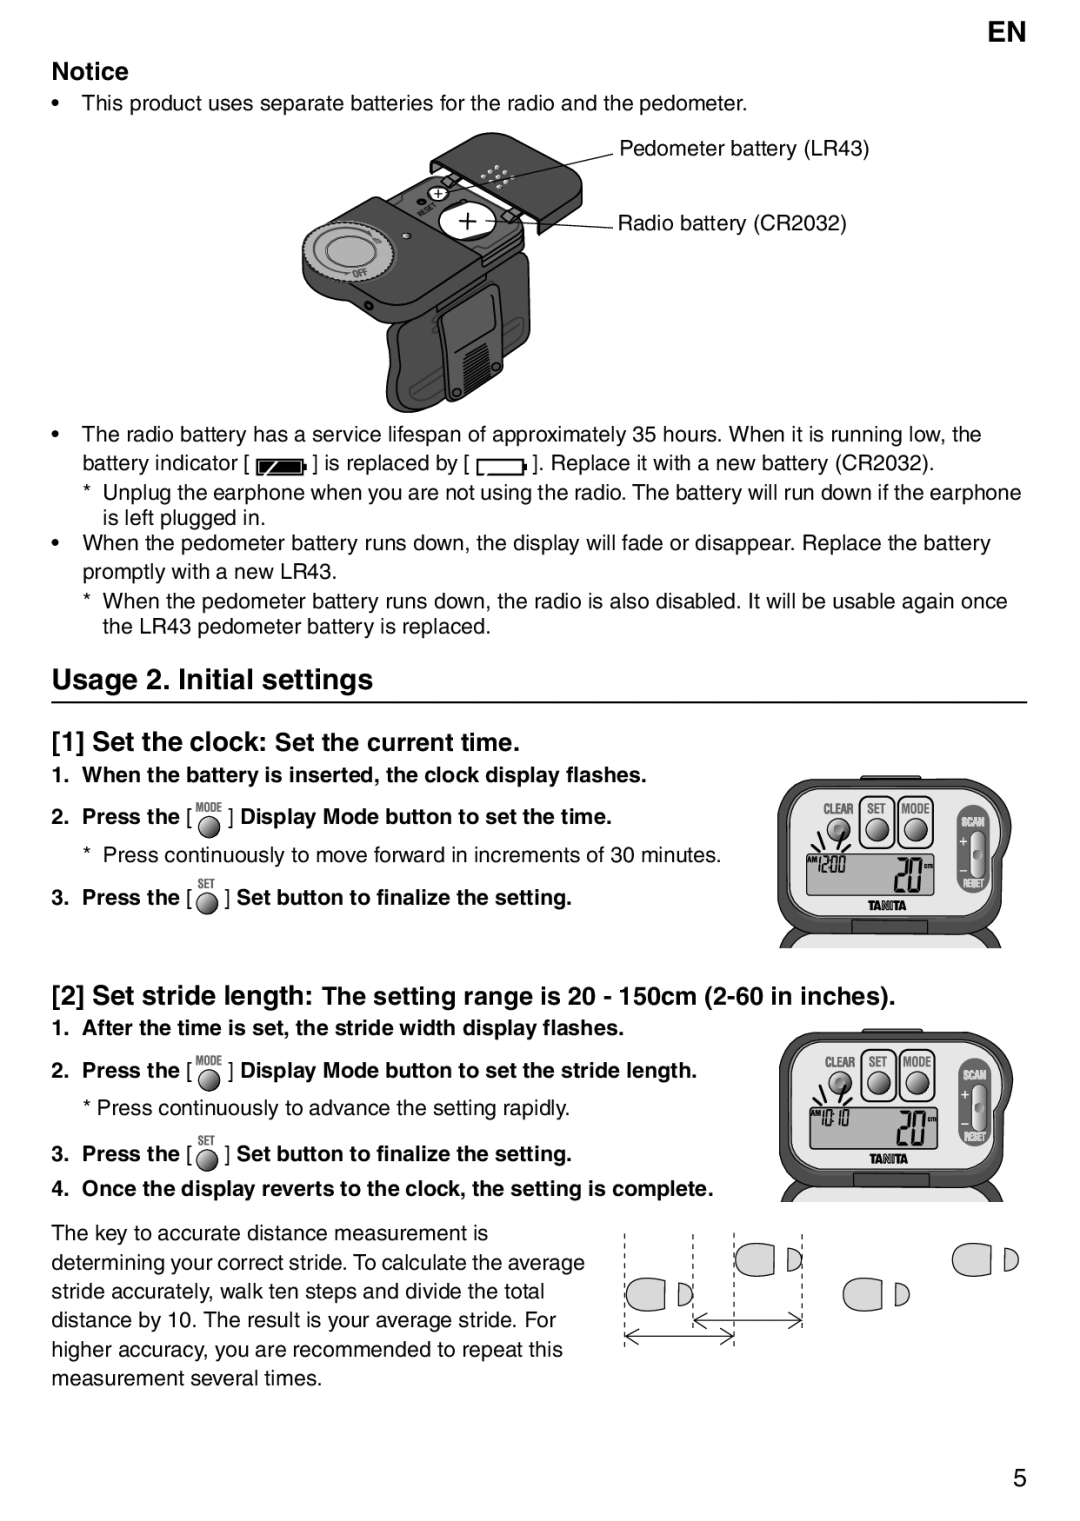 Tanita PD640 Usage 2. Initial settings, 1Set the clock Set the current time, Press the Set button to finalize the setting 